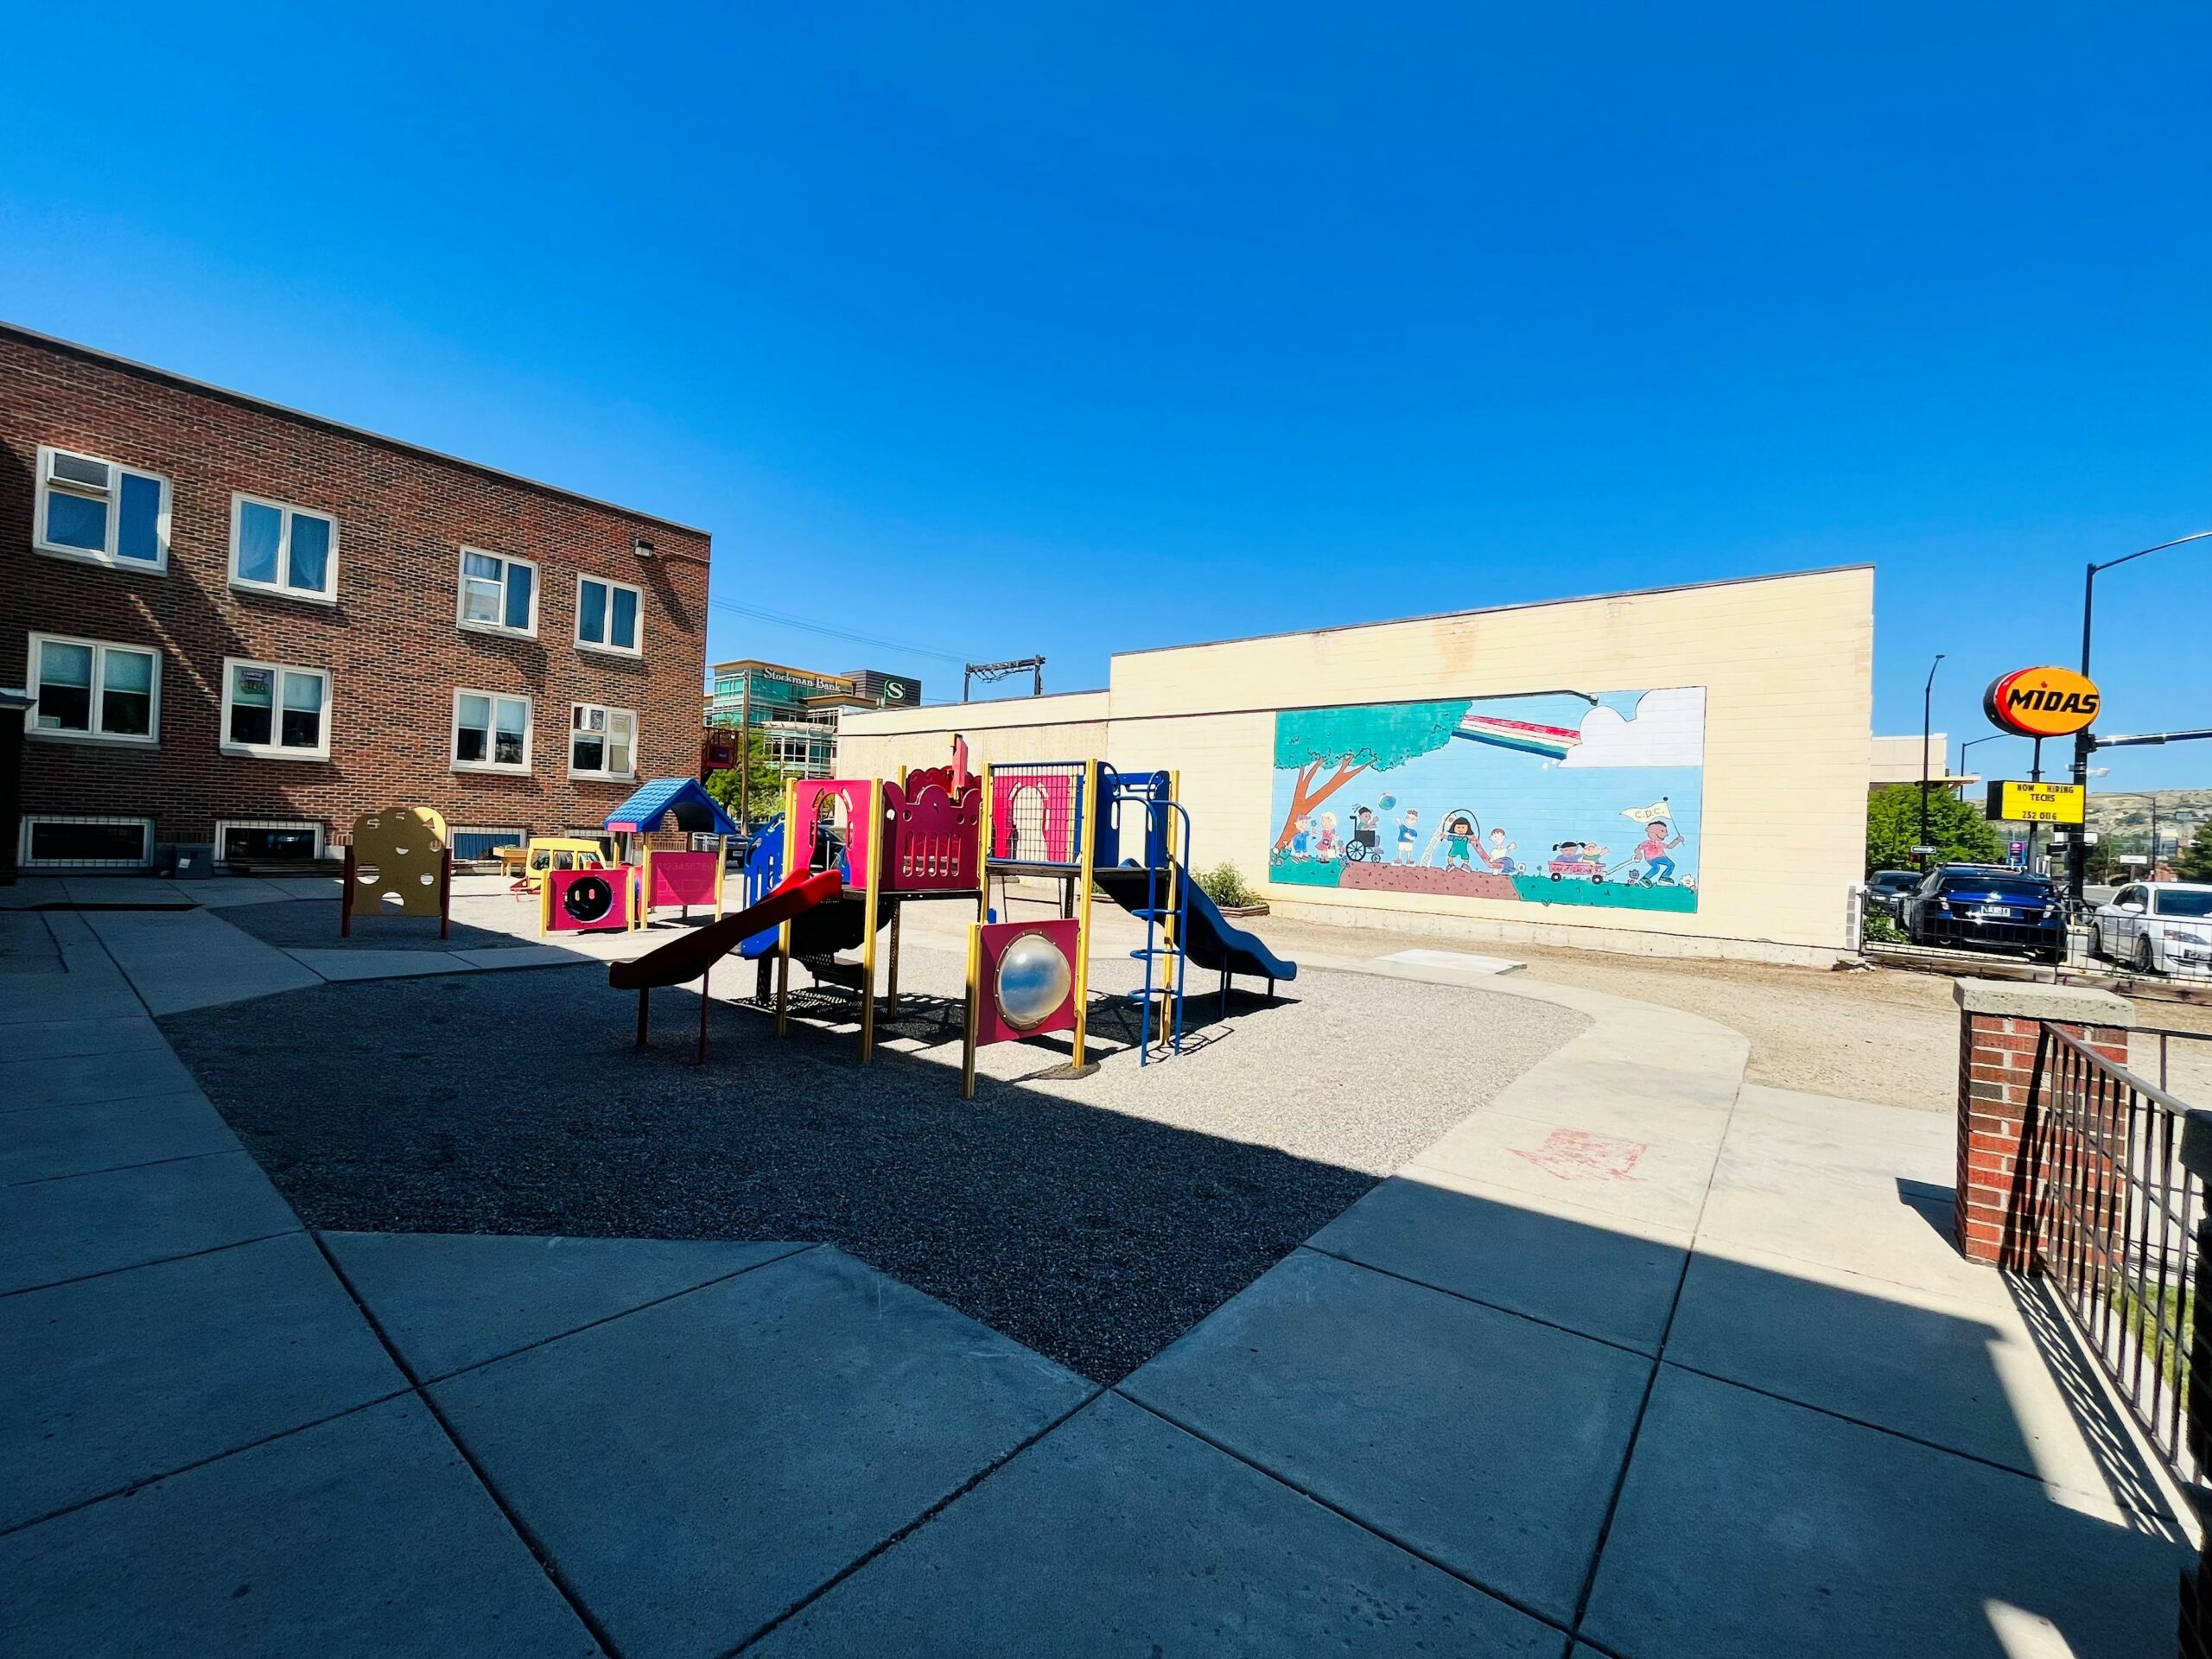 The Billings First Congressional Church courtyard with the old mural of primary colors and kids playing.